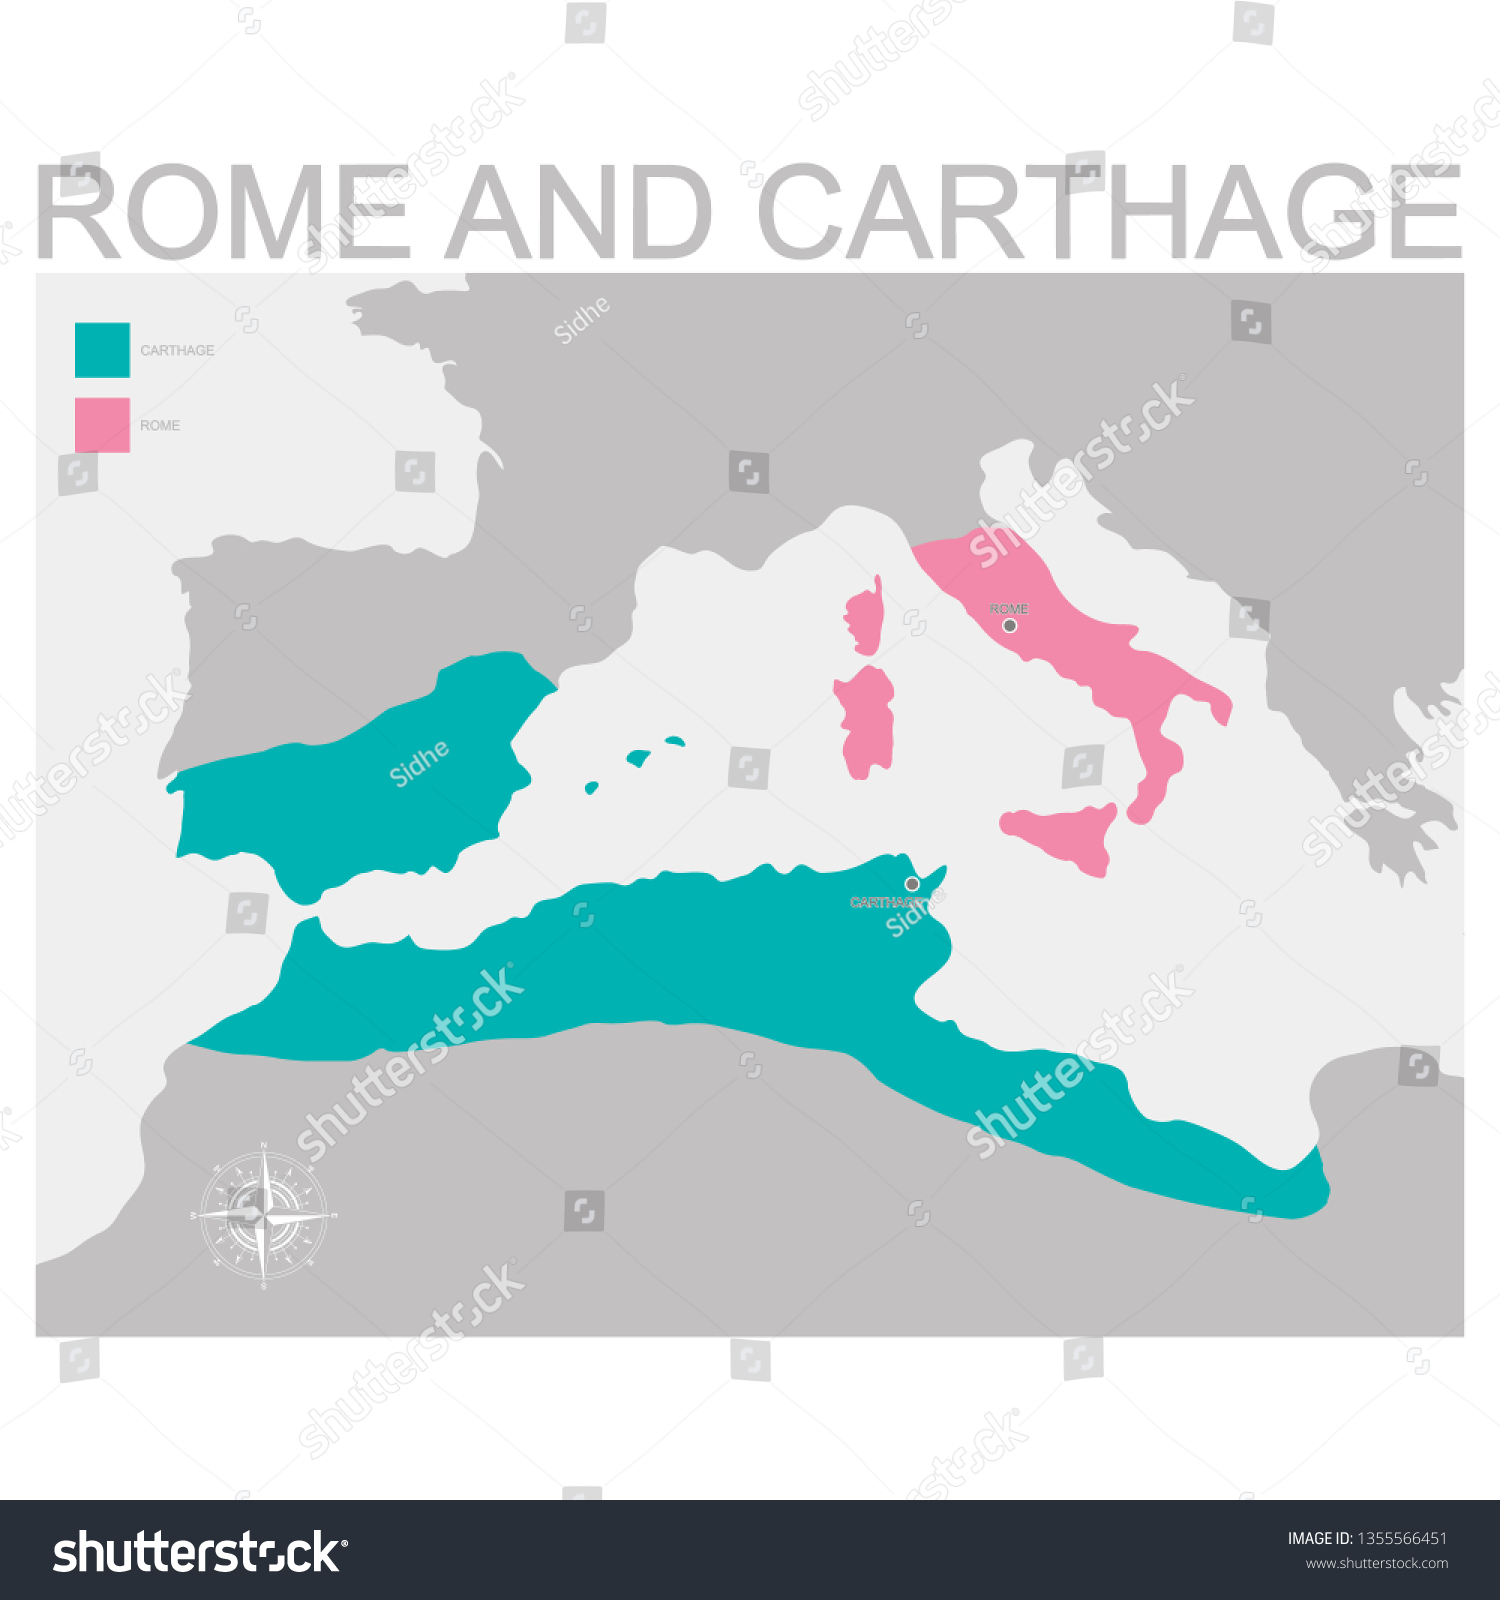 Stock Vector Vector Map Of The Rome And Carthage Territory 1355566451 